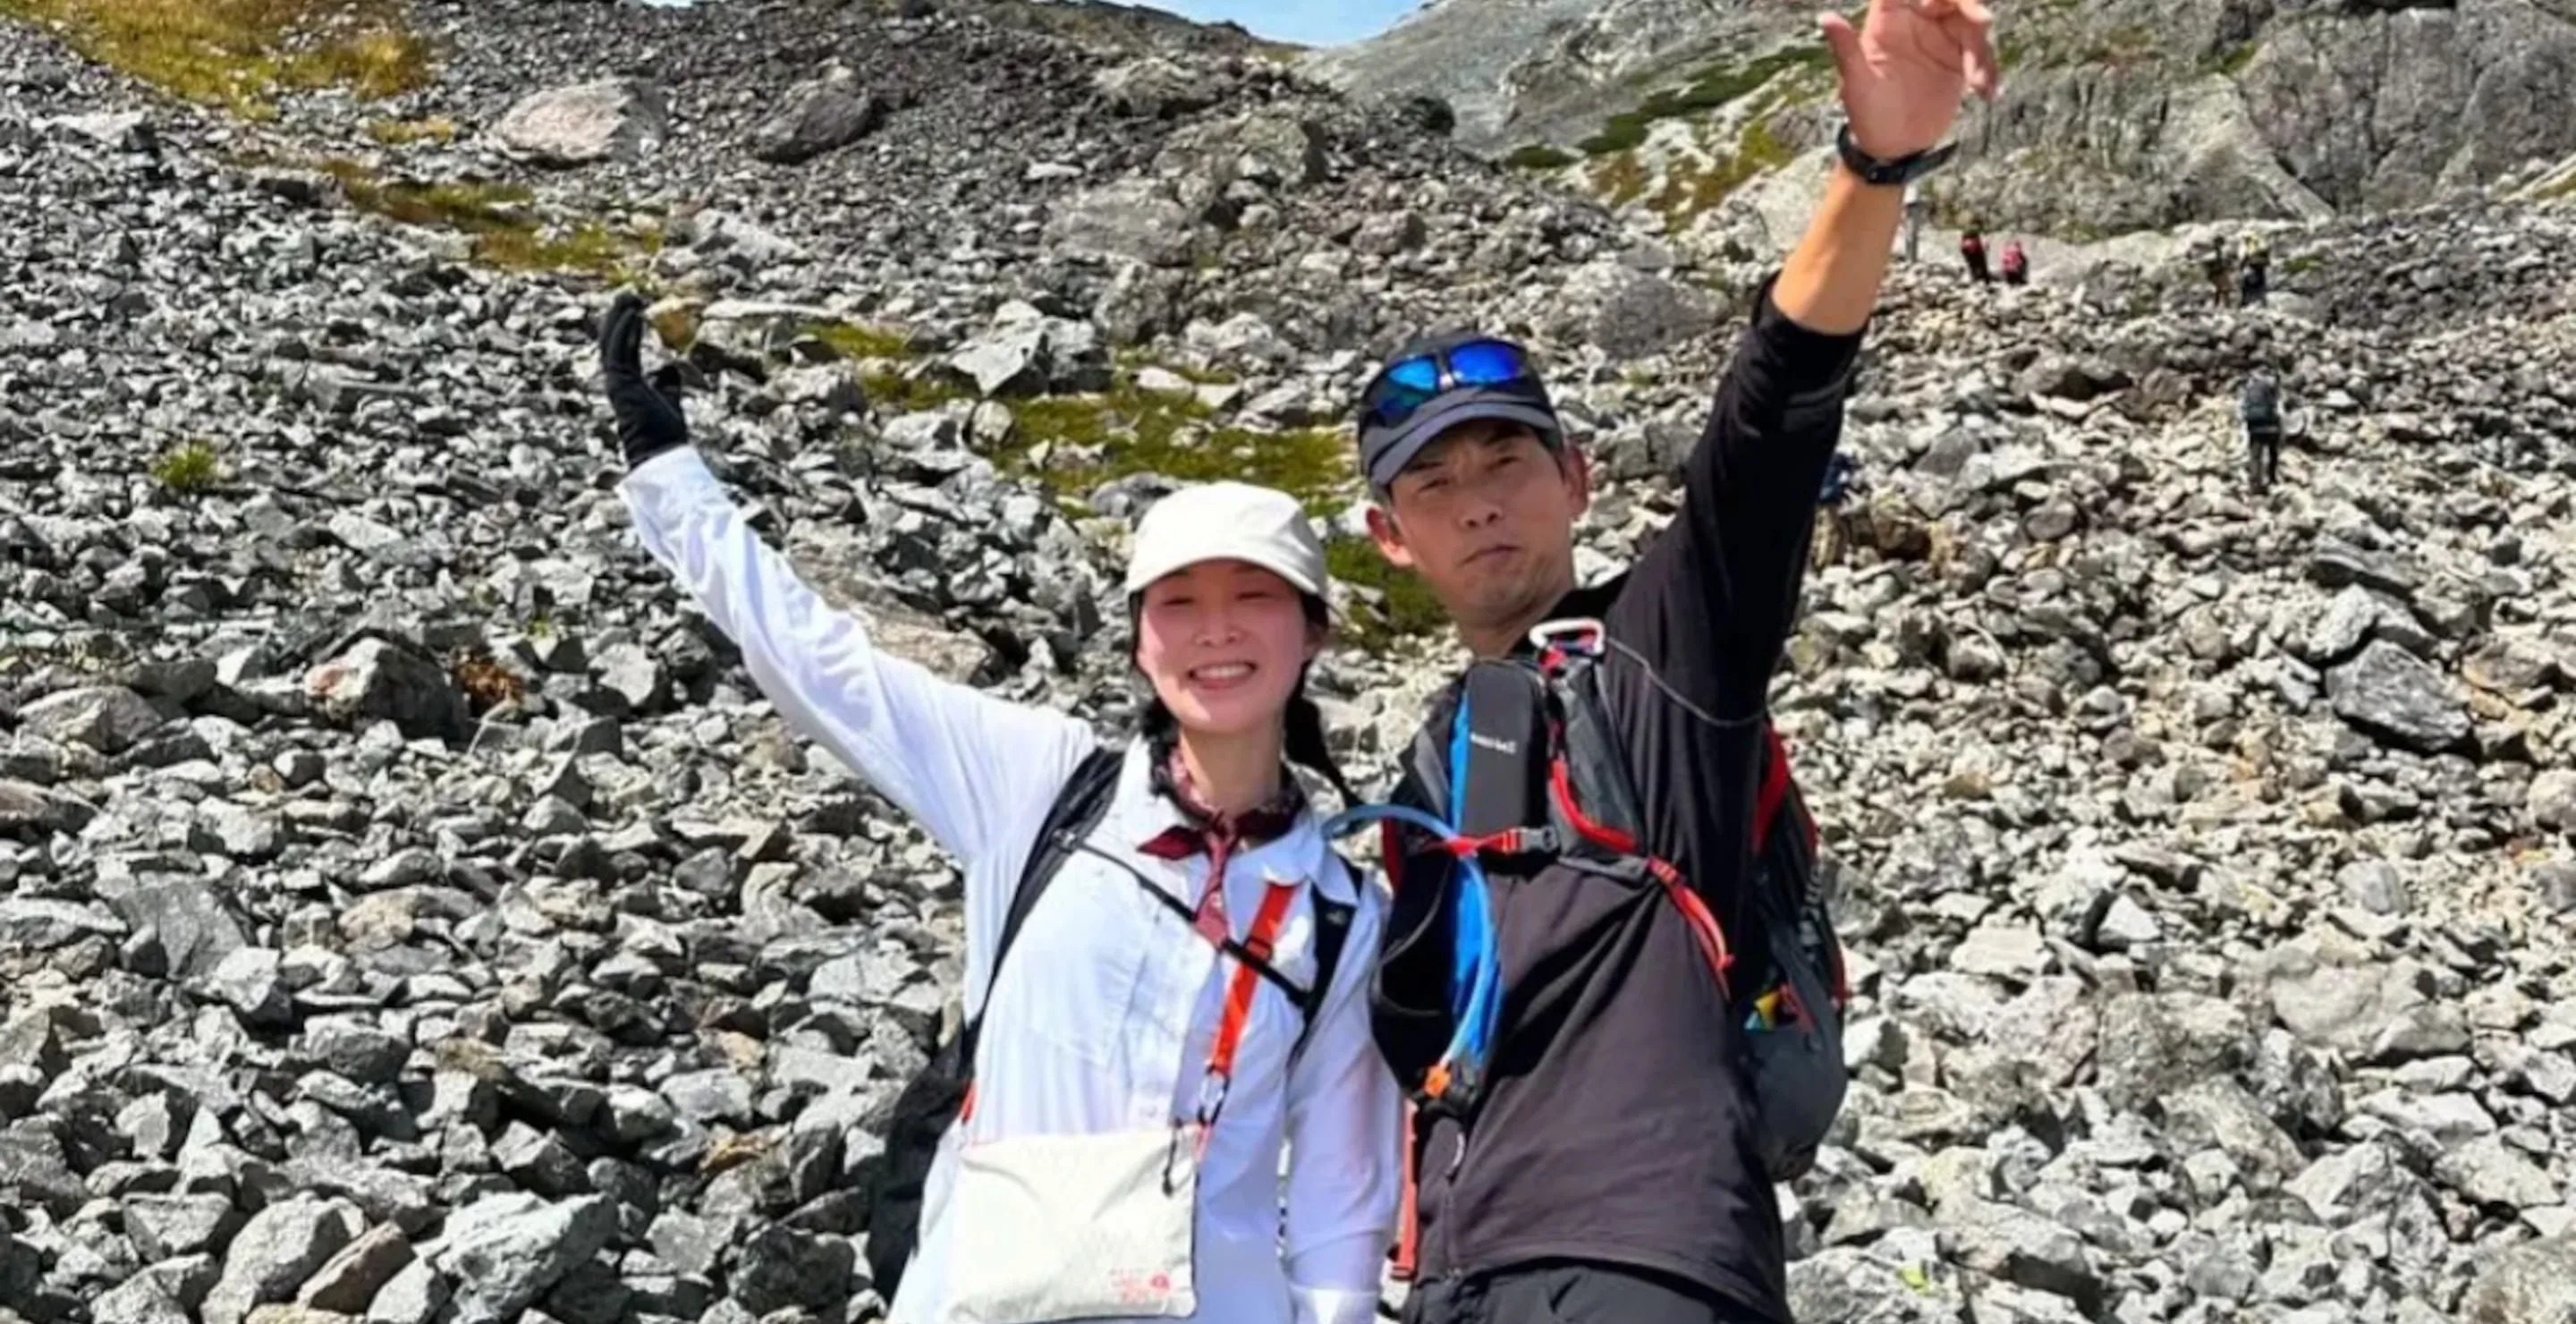 Travel Influencer Couple Drowns After Wife Tragically Tries To Save Husband